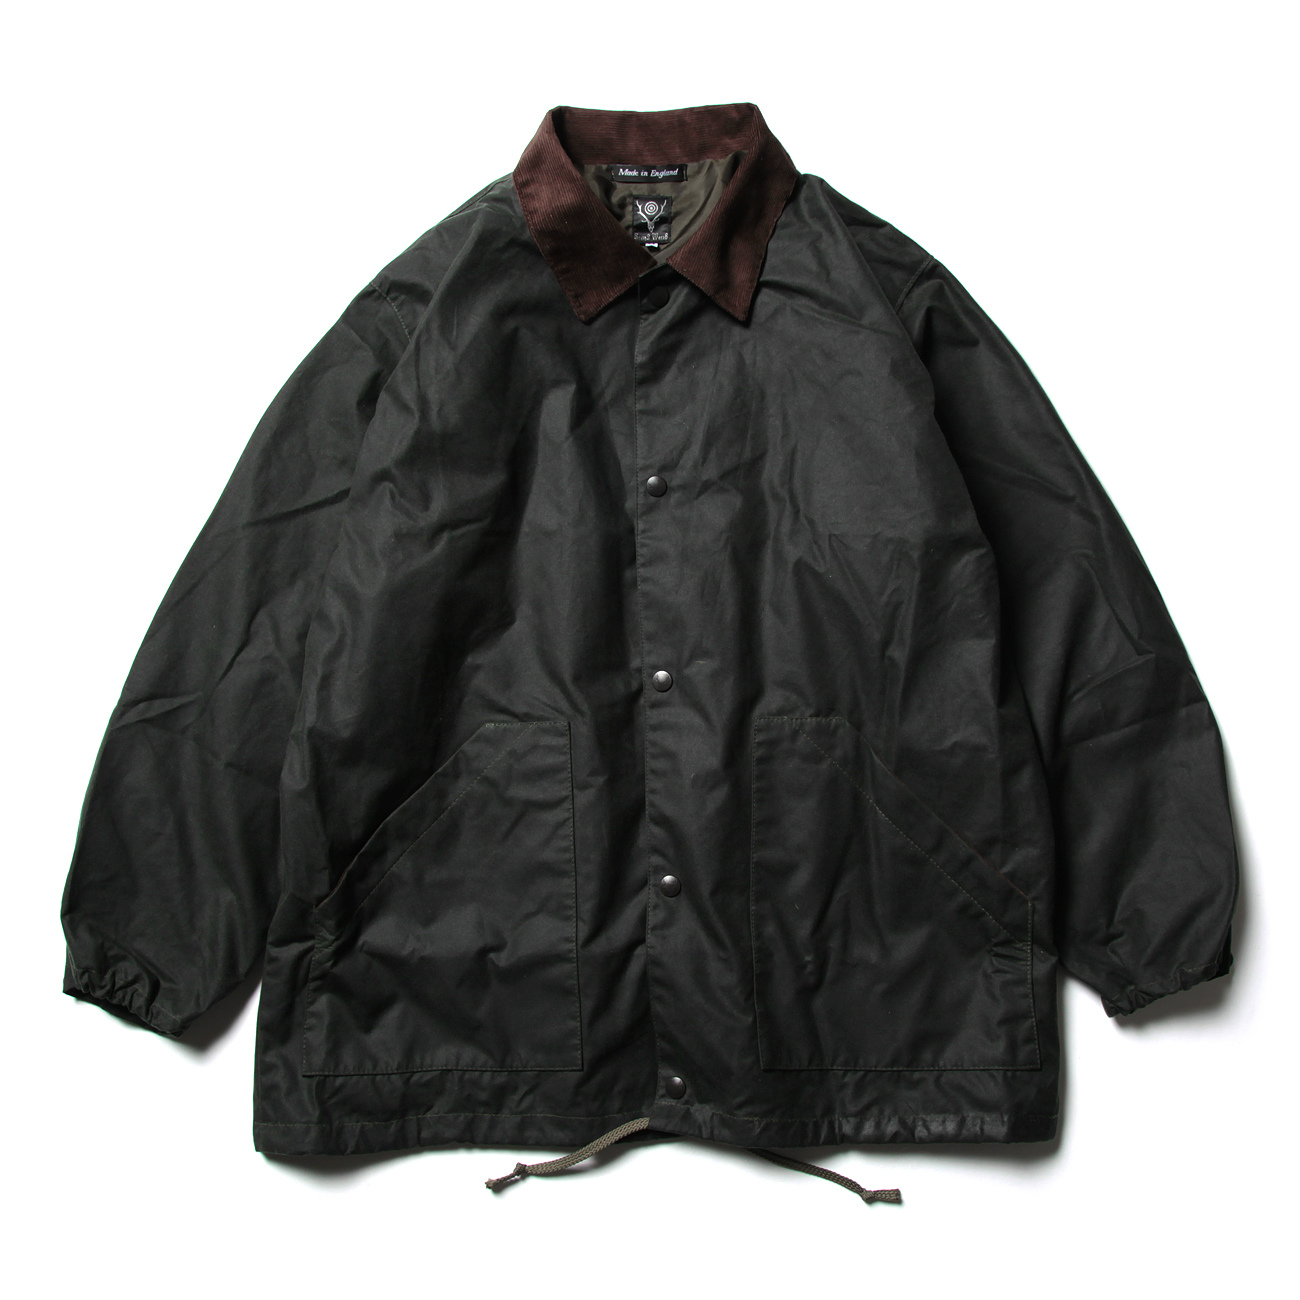 Waxed Cotton Coach Jacket - Solid - Olive